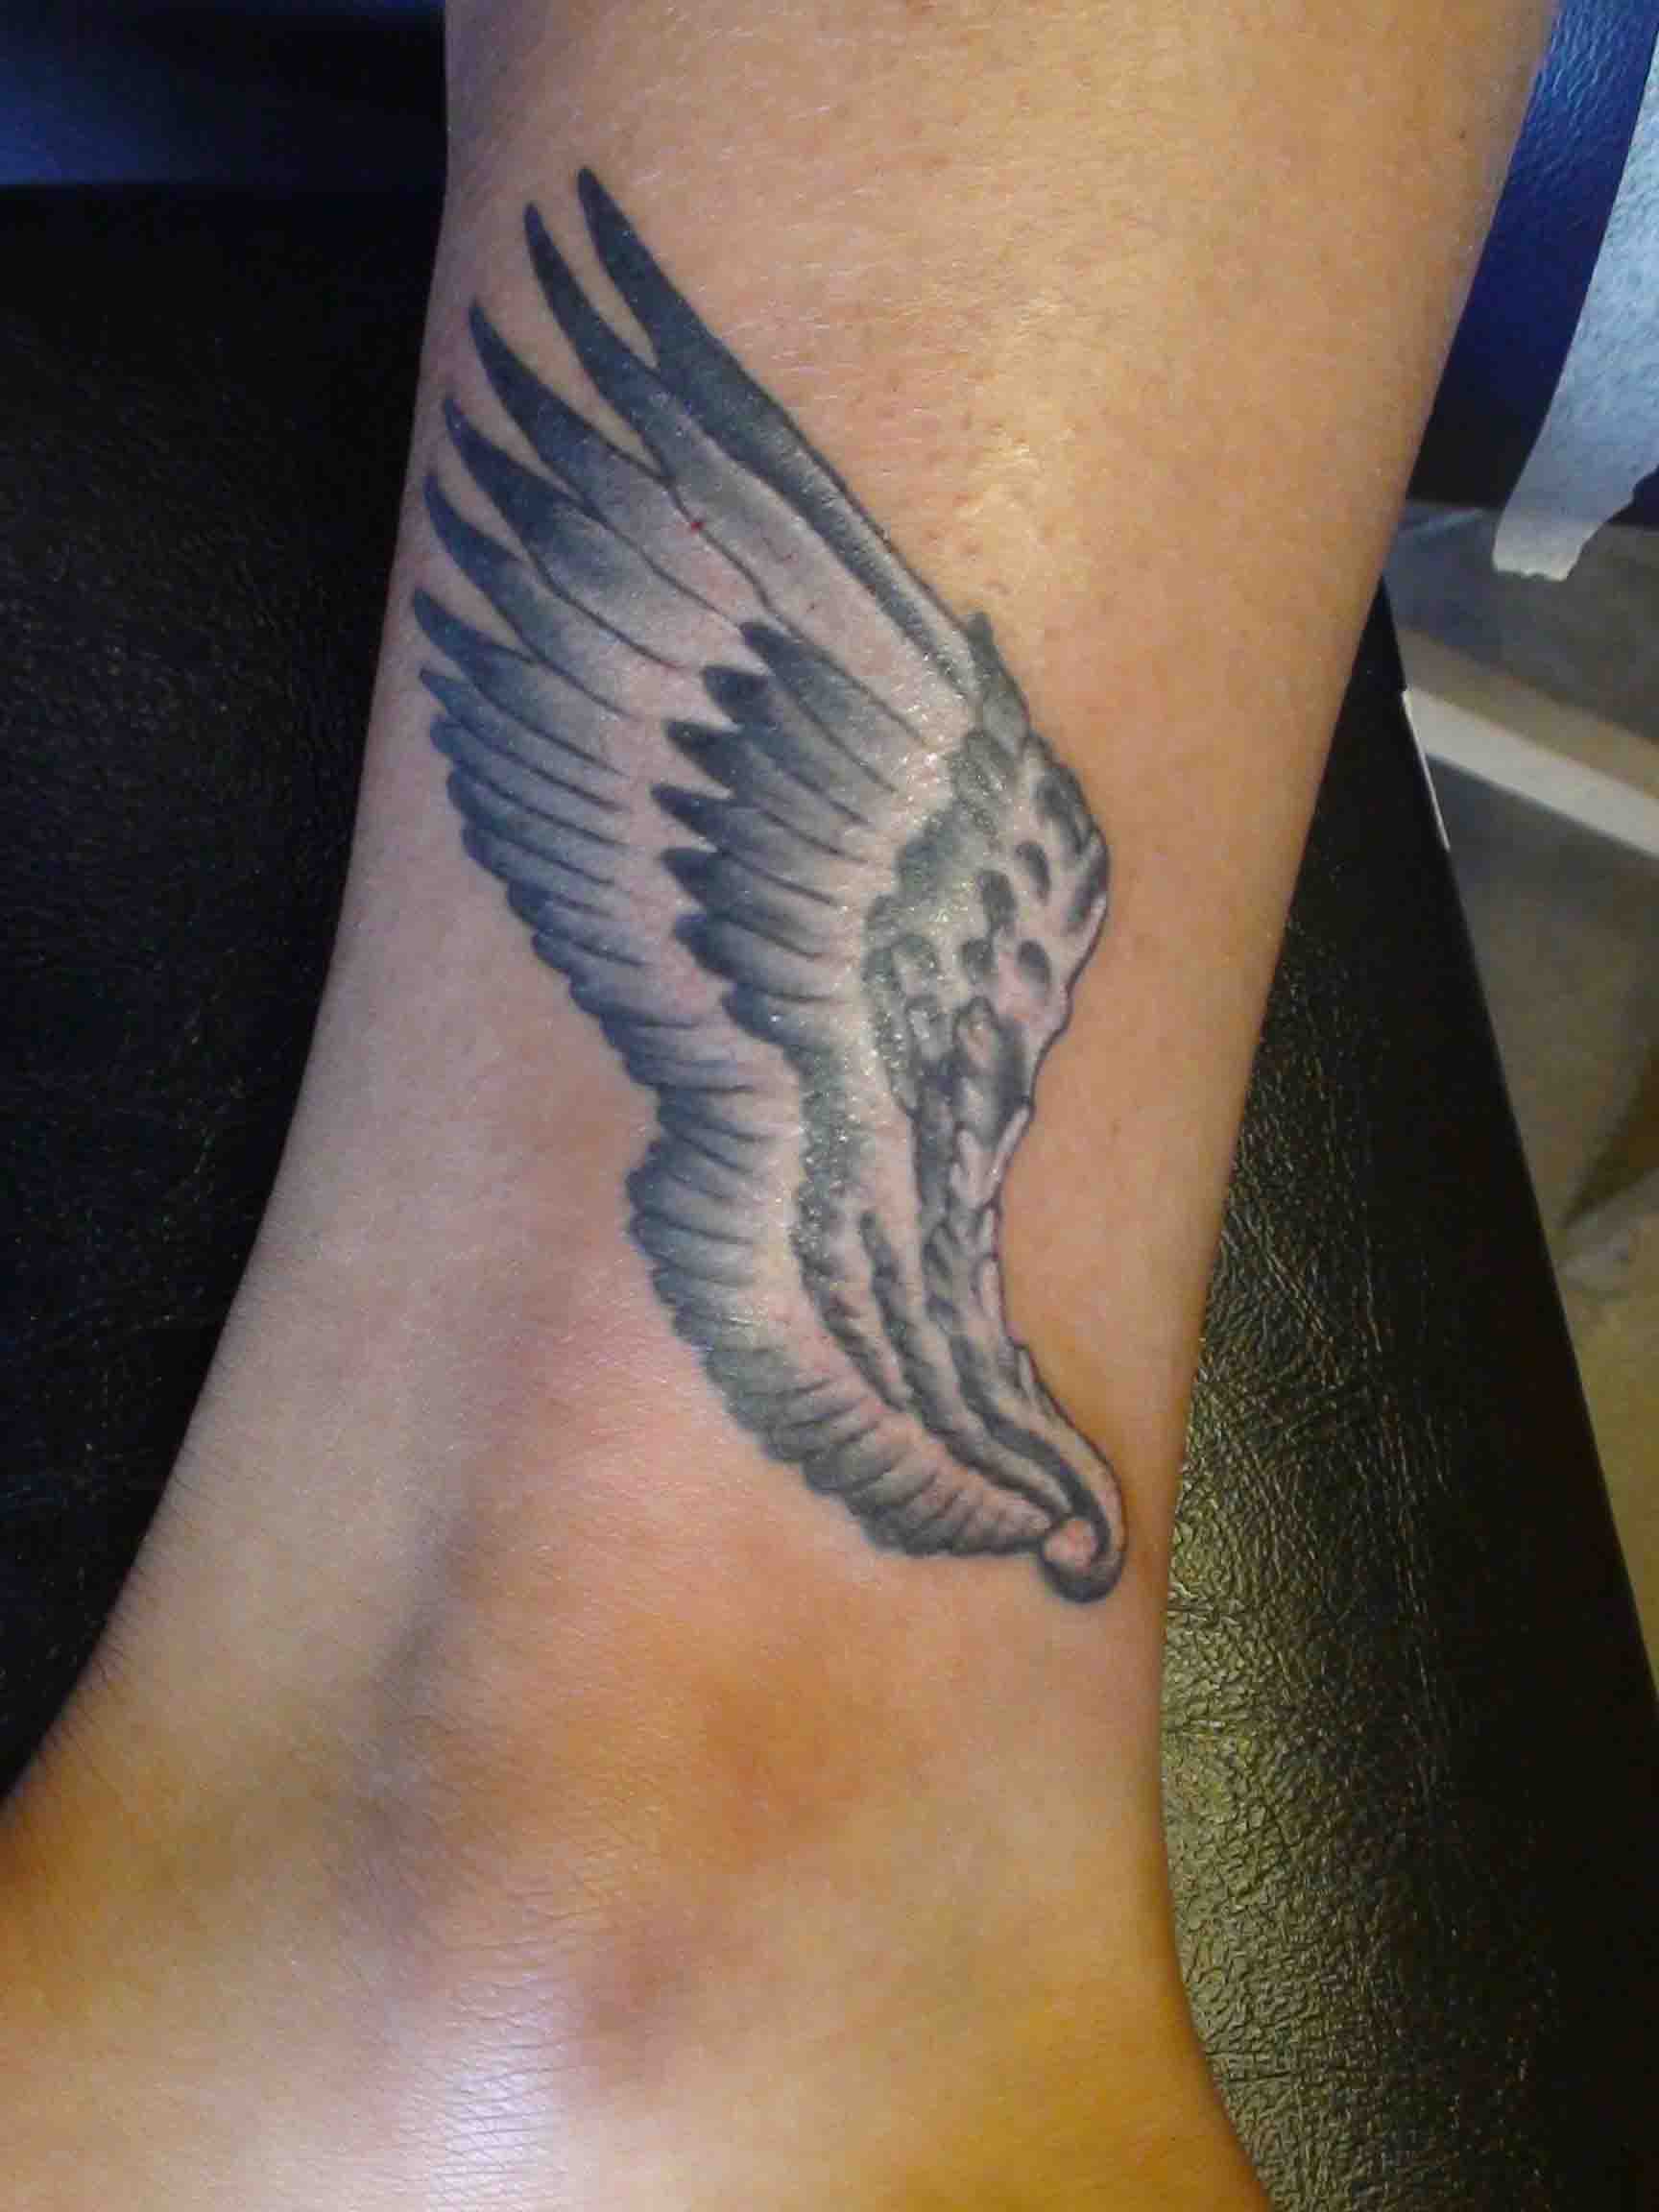 Wing tattoo by Shaun